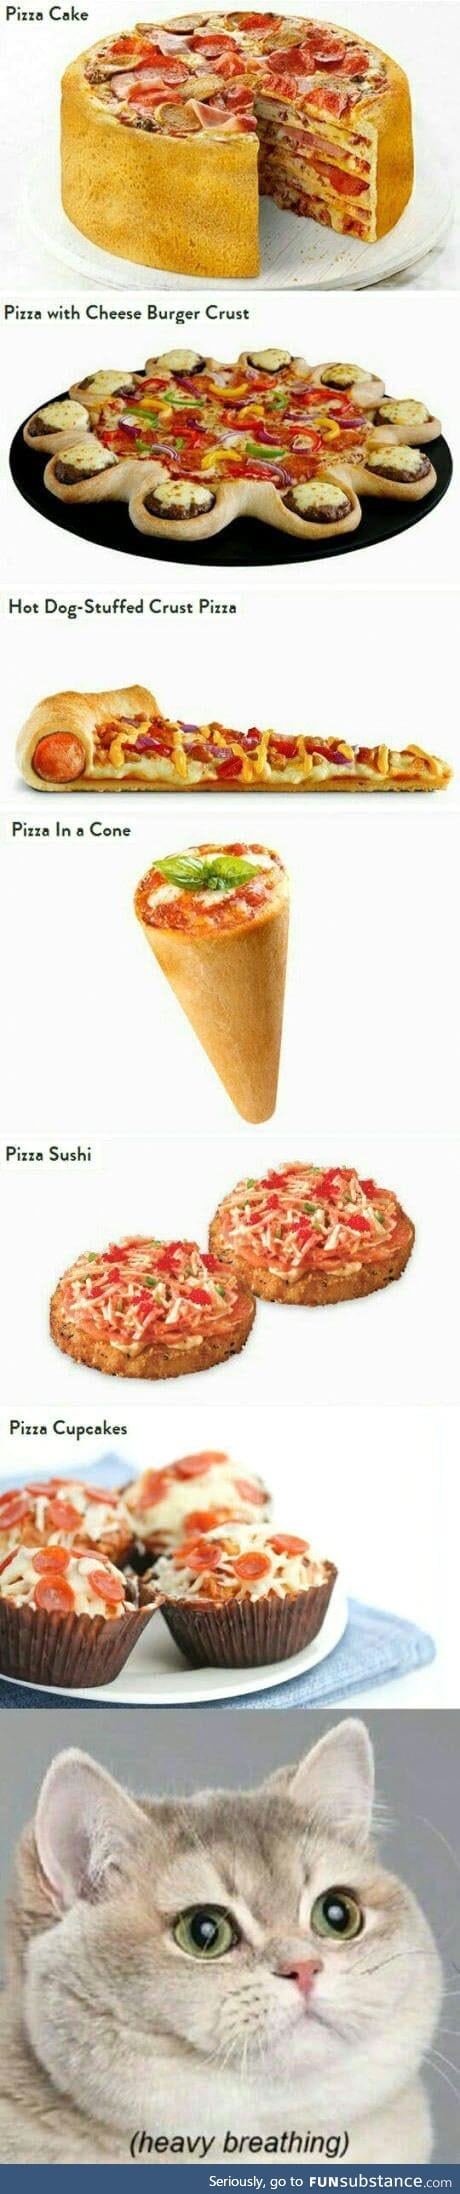 Types of Pizzas